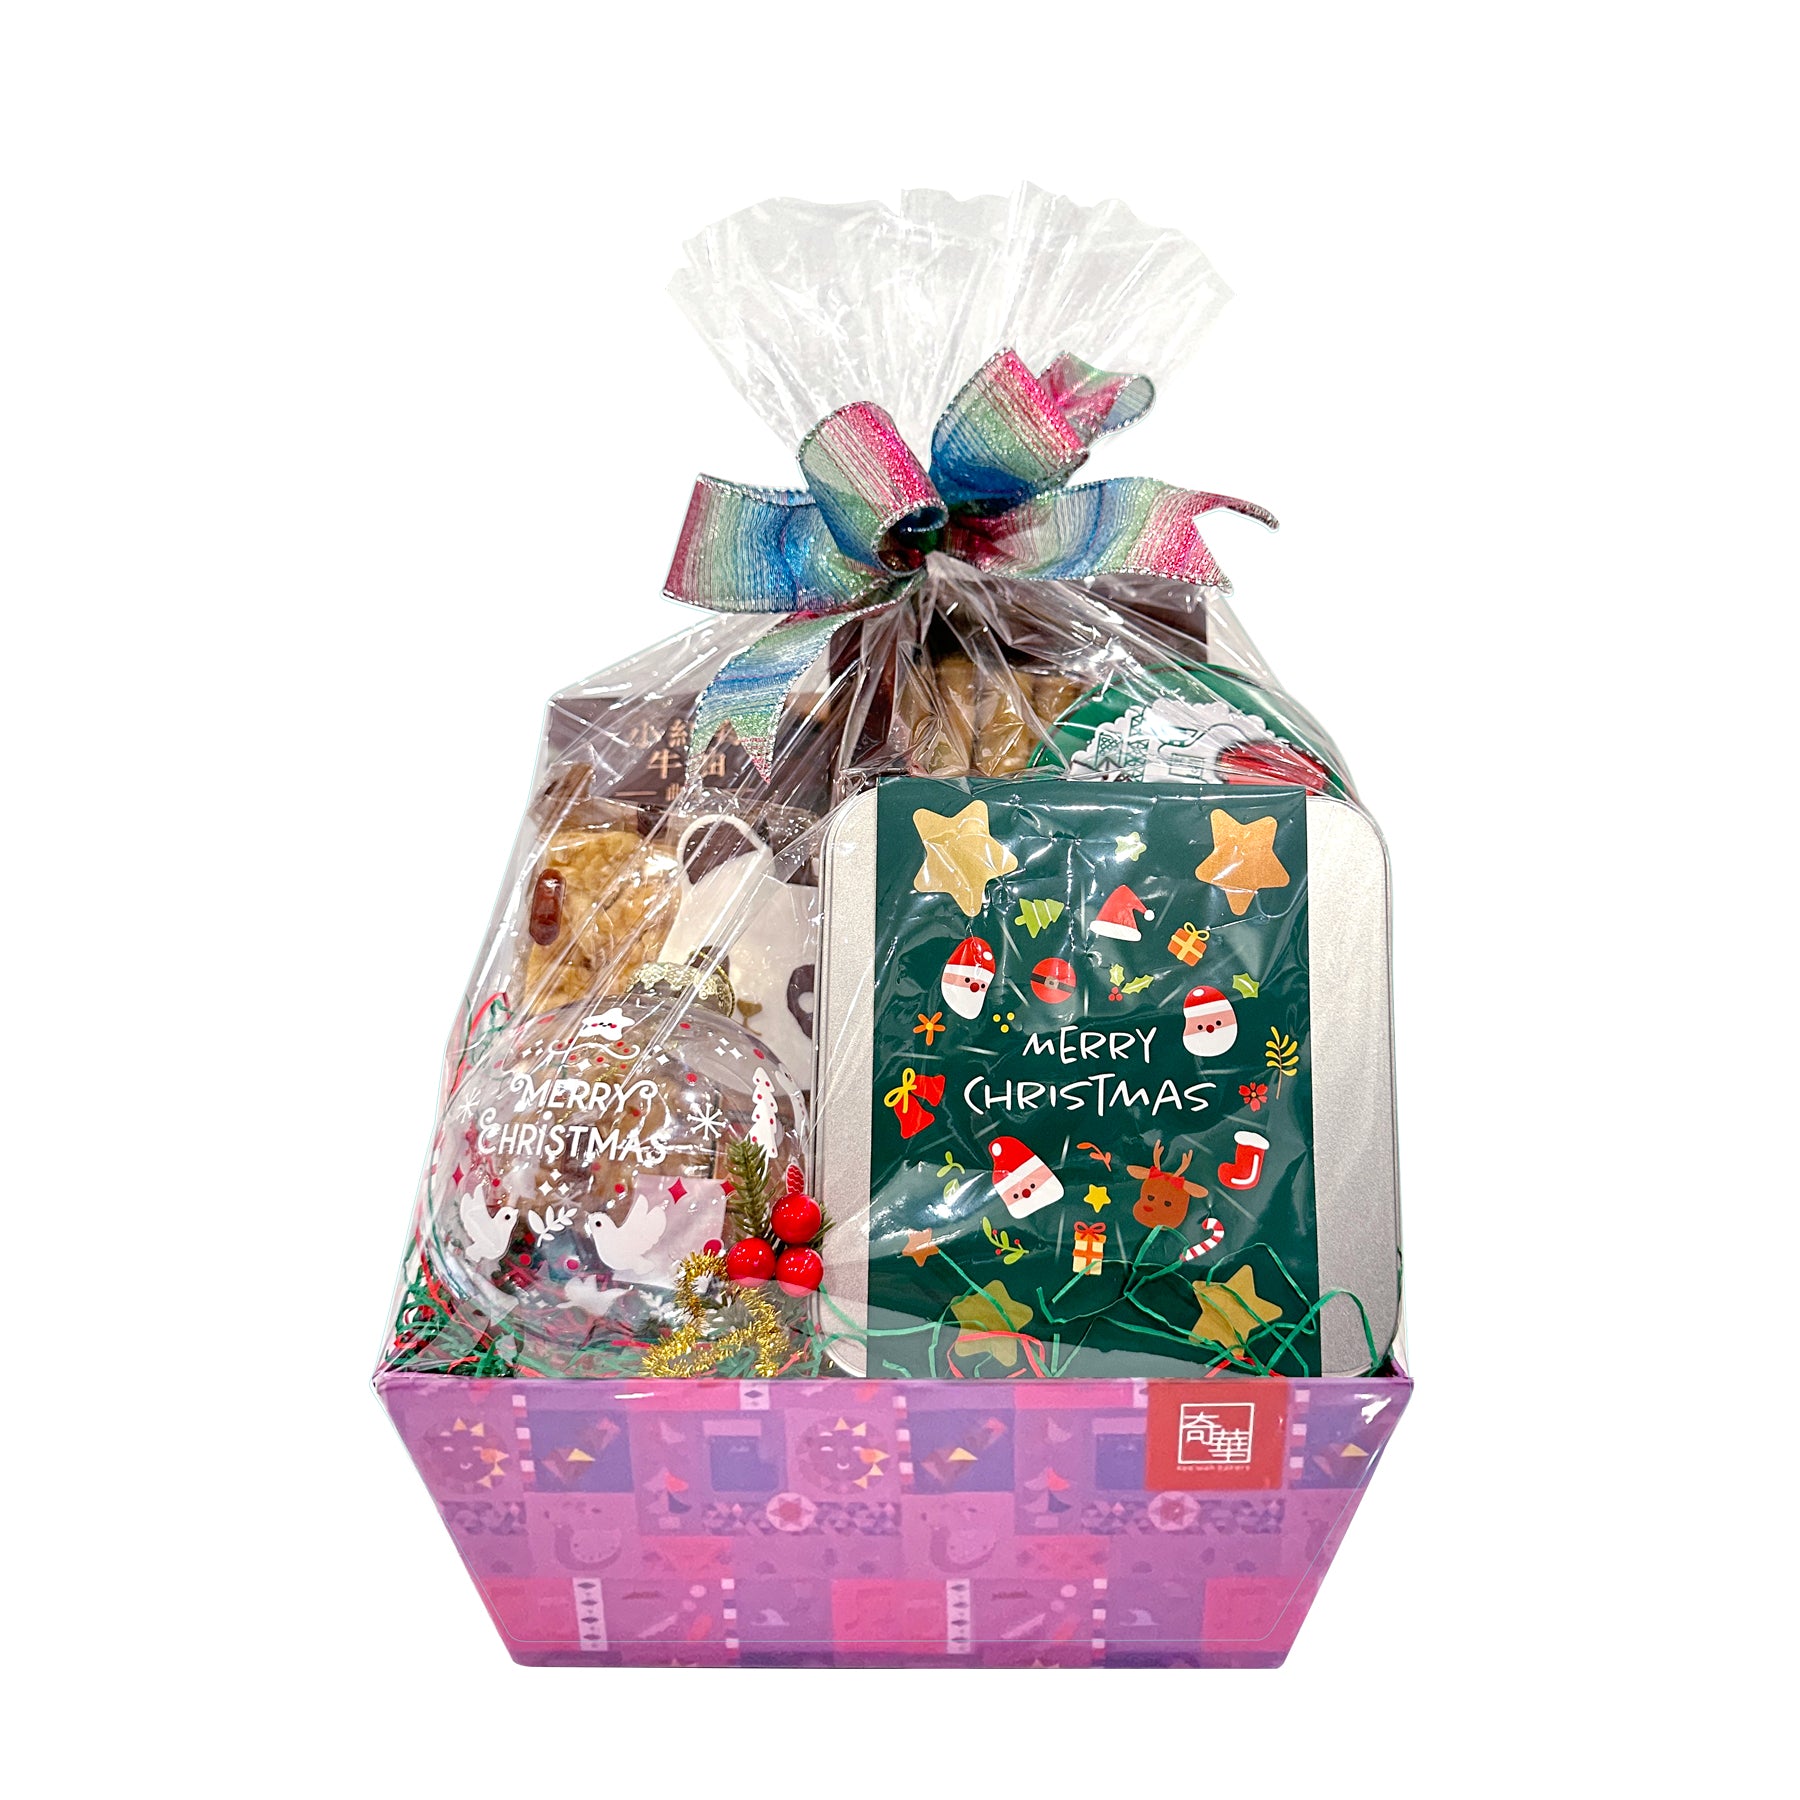  Yeaqee 36 Pcs 12 Pack Christmas Baskets for Gifts